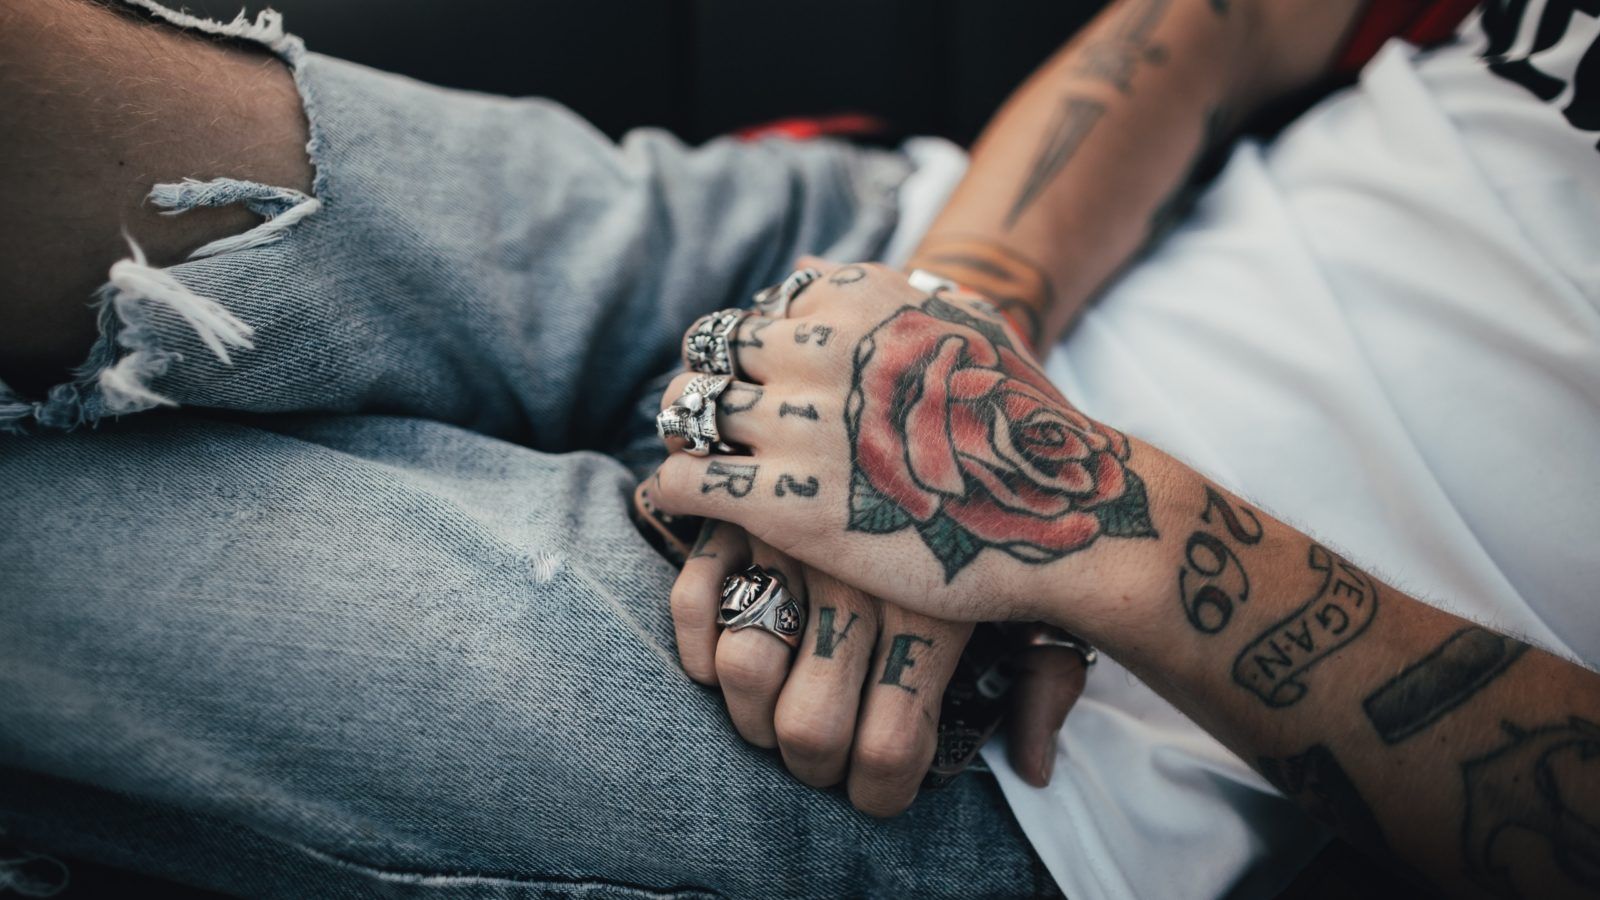 This start-up takes the permanence, commitment and regret out of tattoos